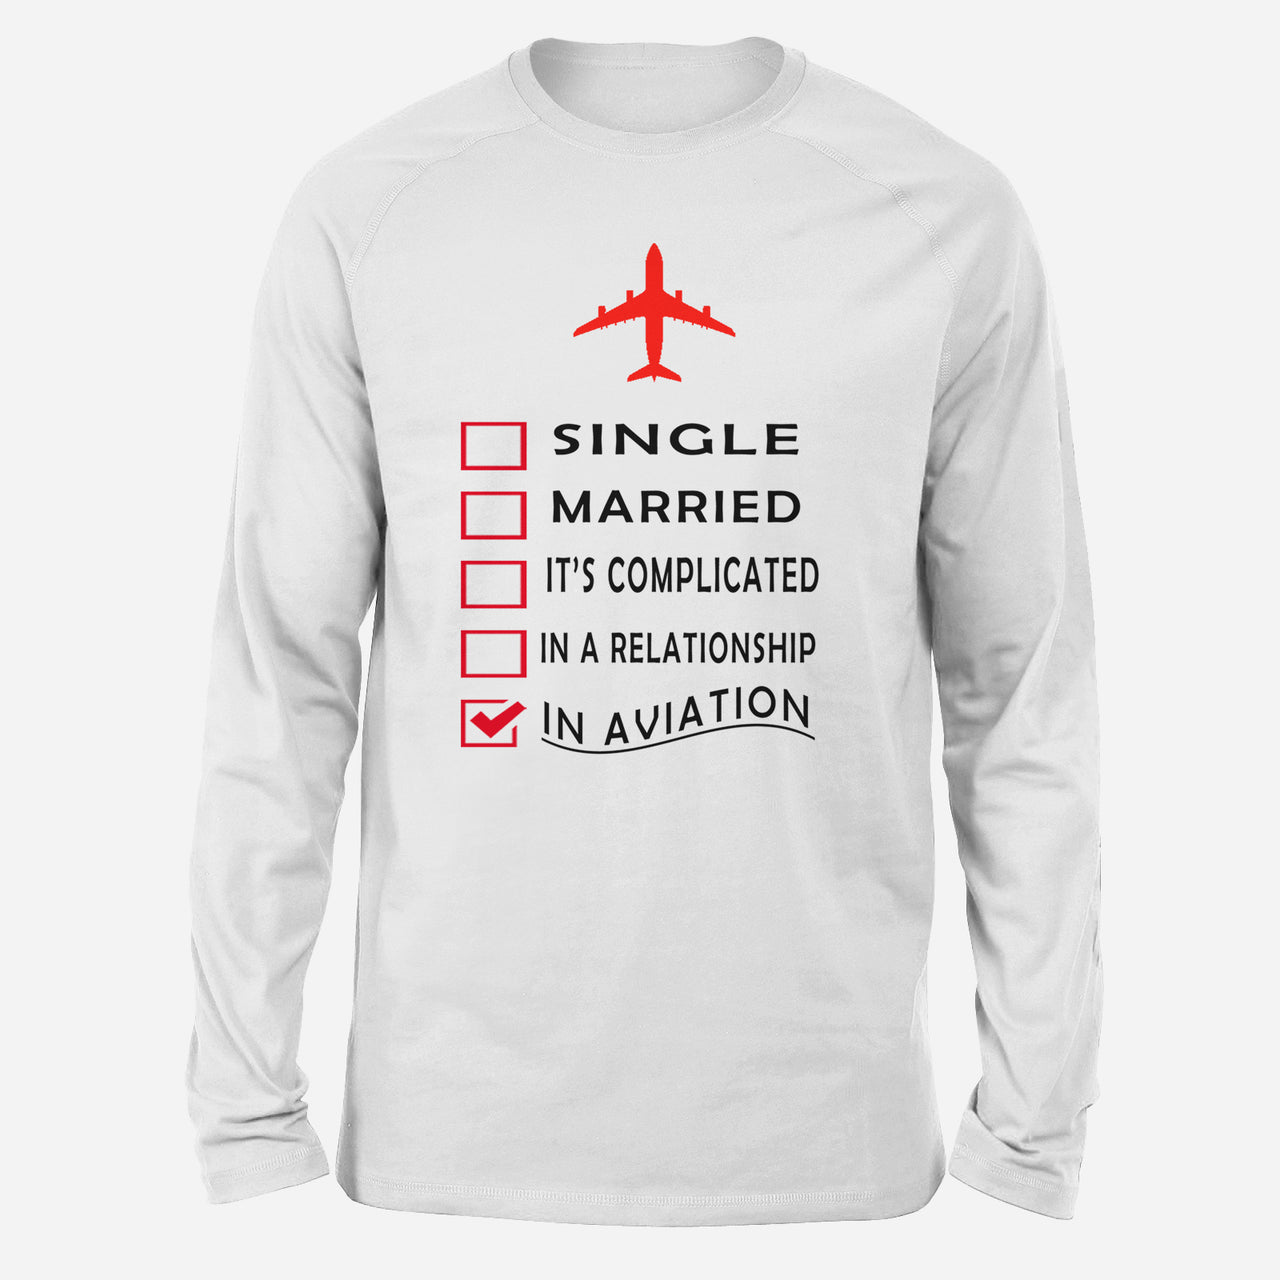 In Aviation Designed Long-Sleeve T-Shirts